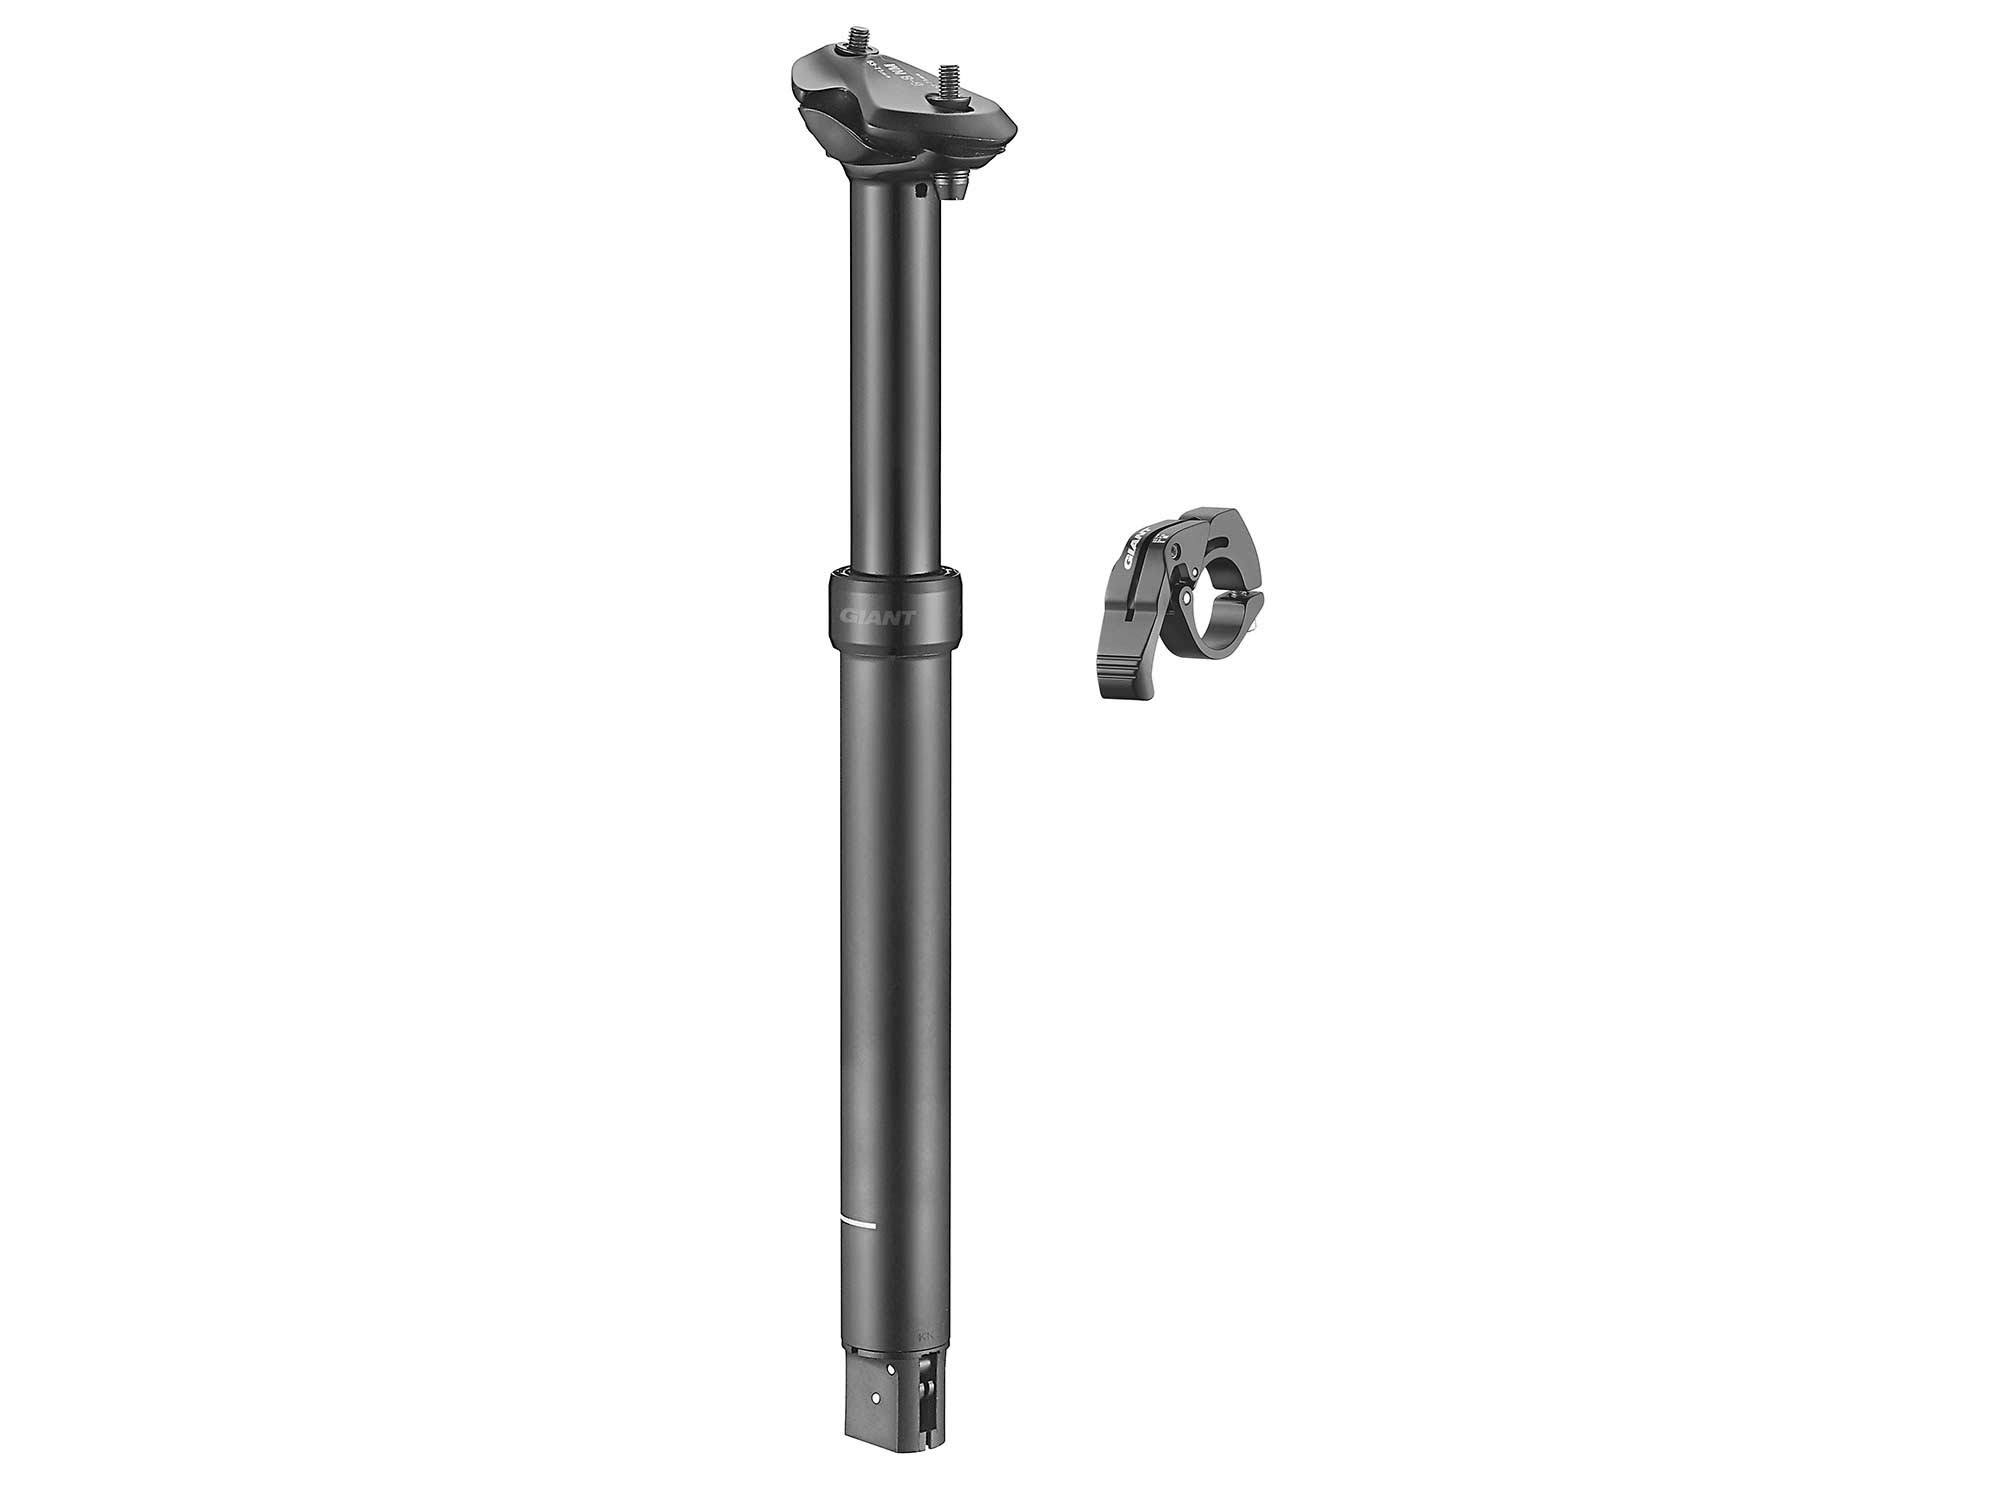 Giant Contact Switch Dropper Seatpost - 2X Remote Lever, 30.9x340mm, Travel 100mm